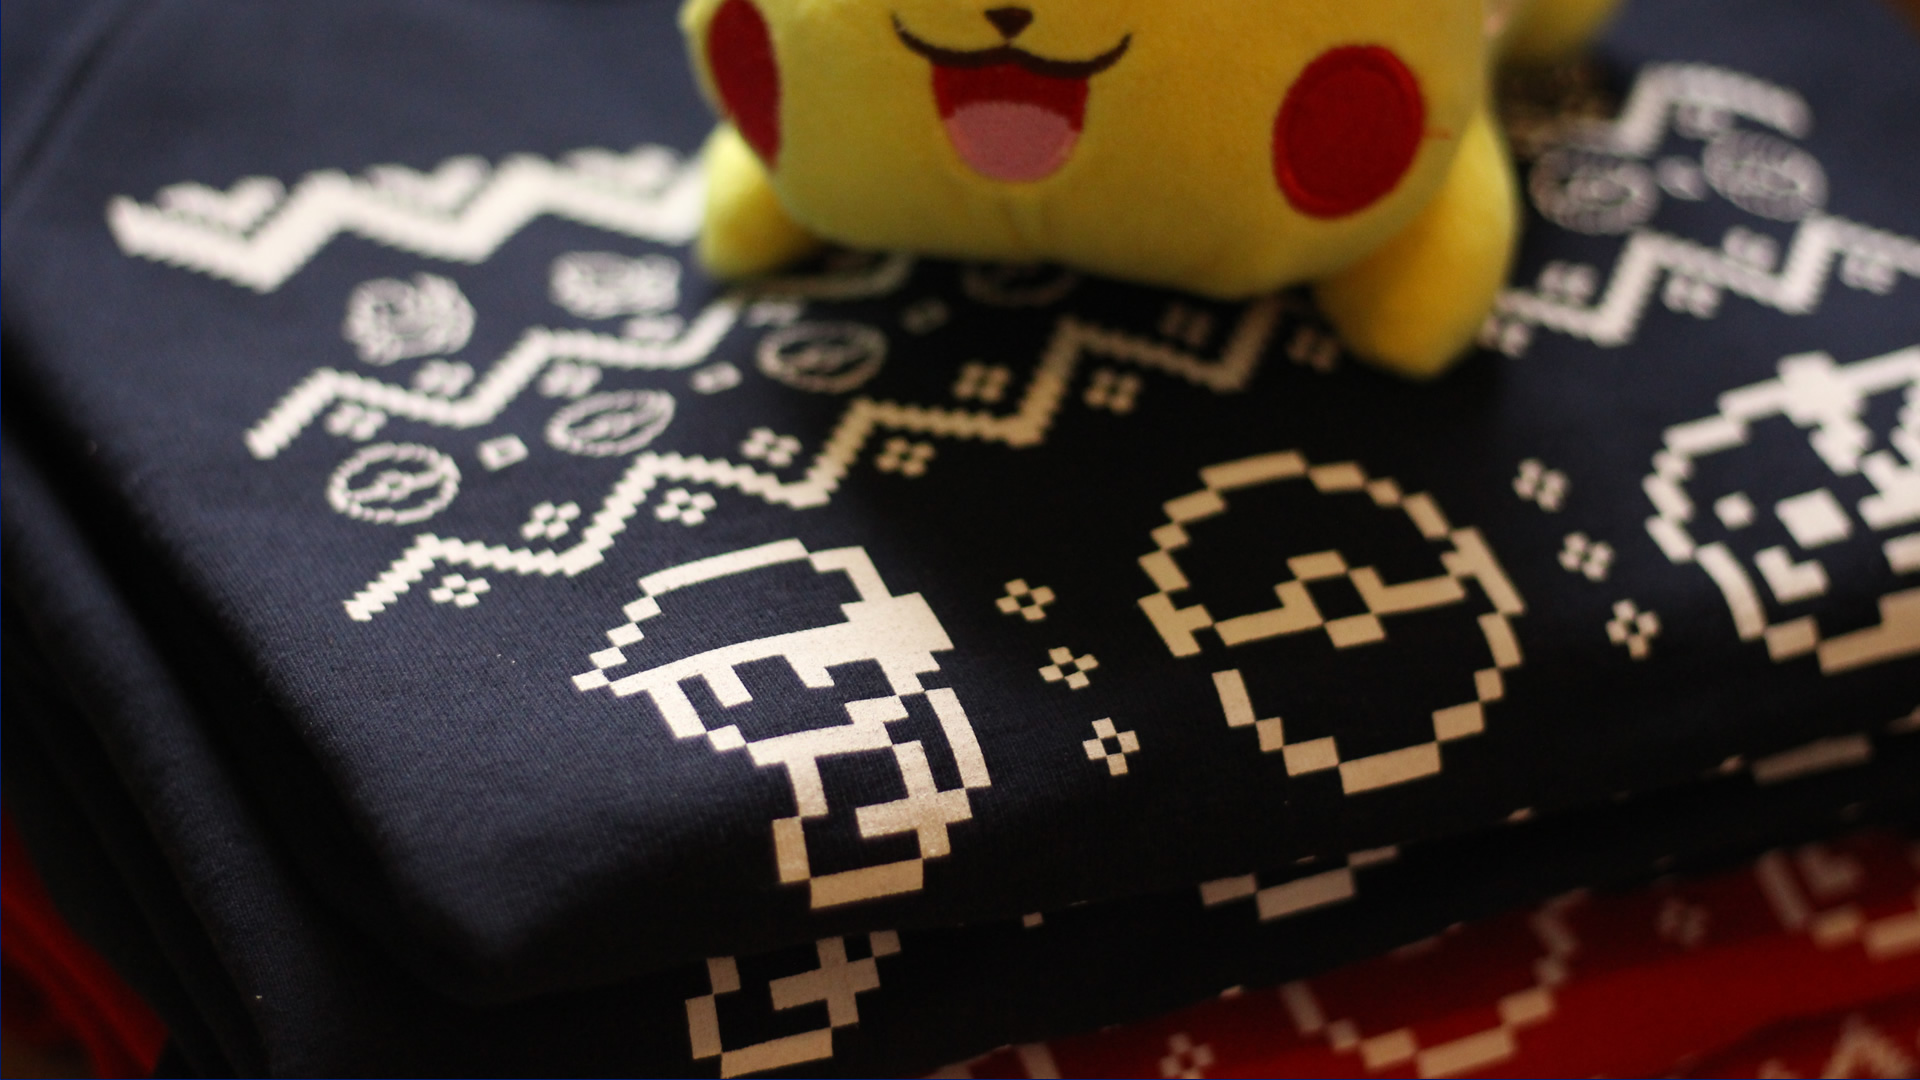 Ugly Pokemon Sweater? Feed a Pikachu this Christmas